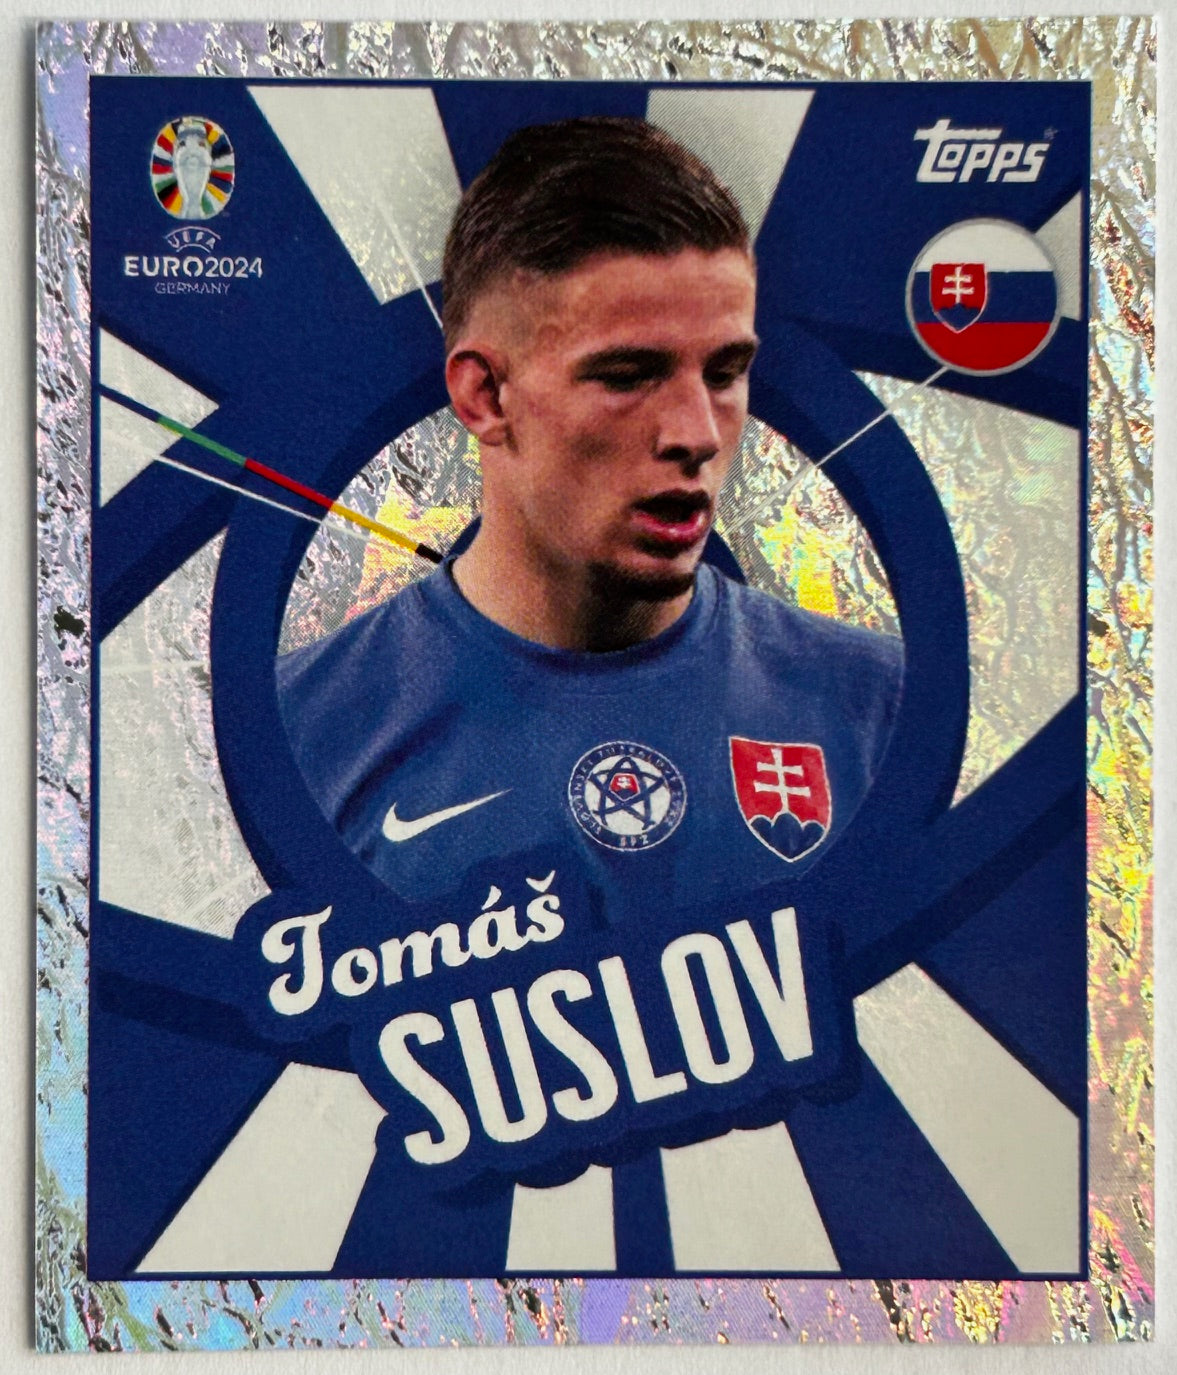 Topps UEFA EURO 2024 Sticker Collection - TOMAS SUSLOV (SLOVAKIA) Foil Player to Watch SVK PTW